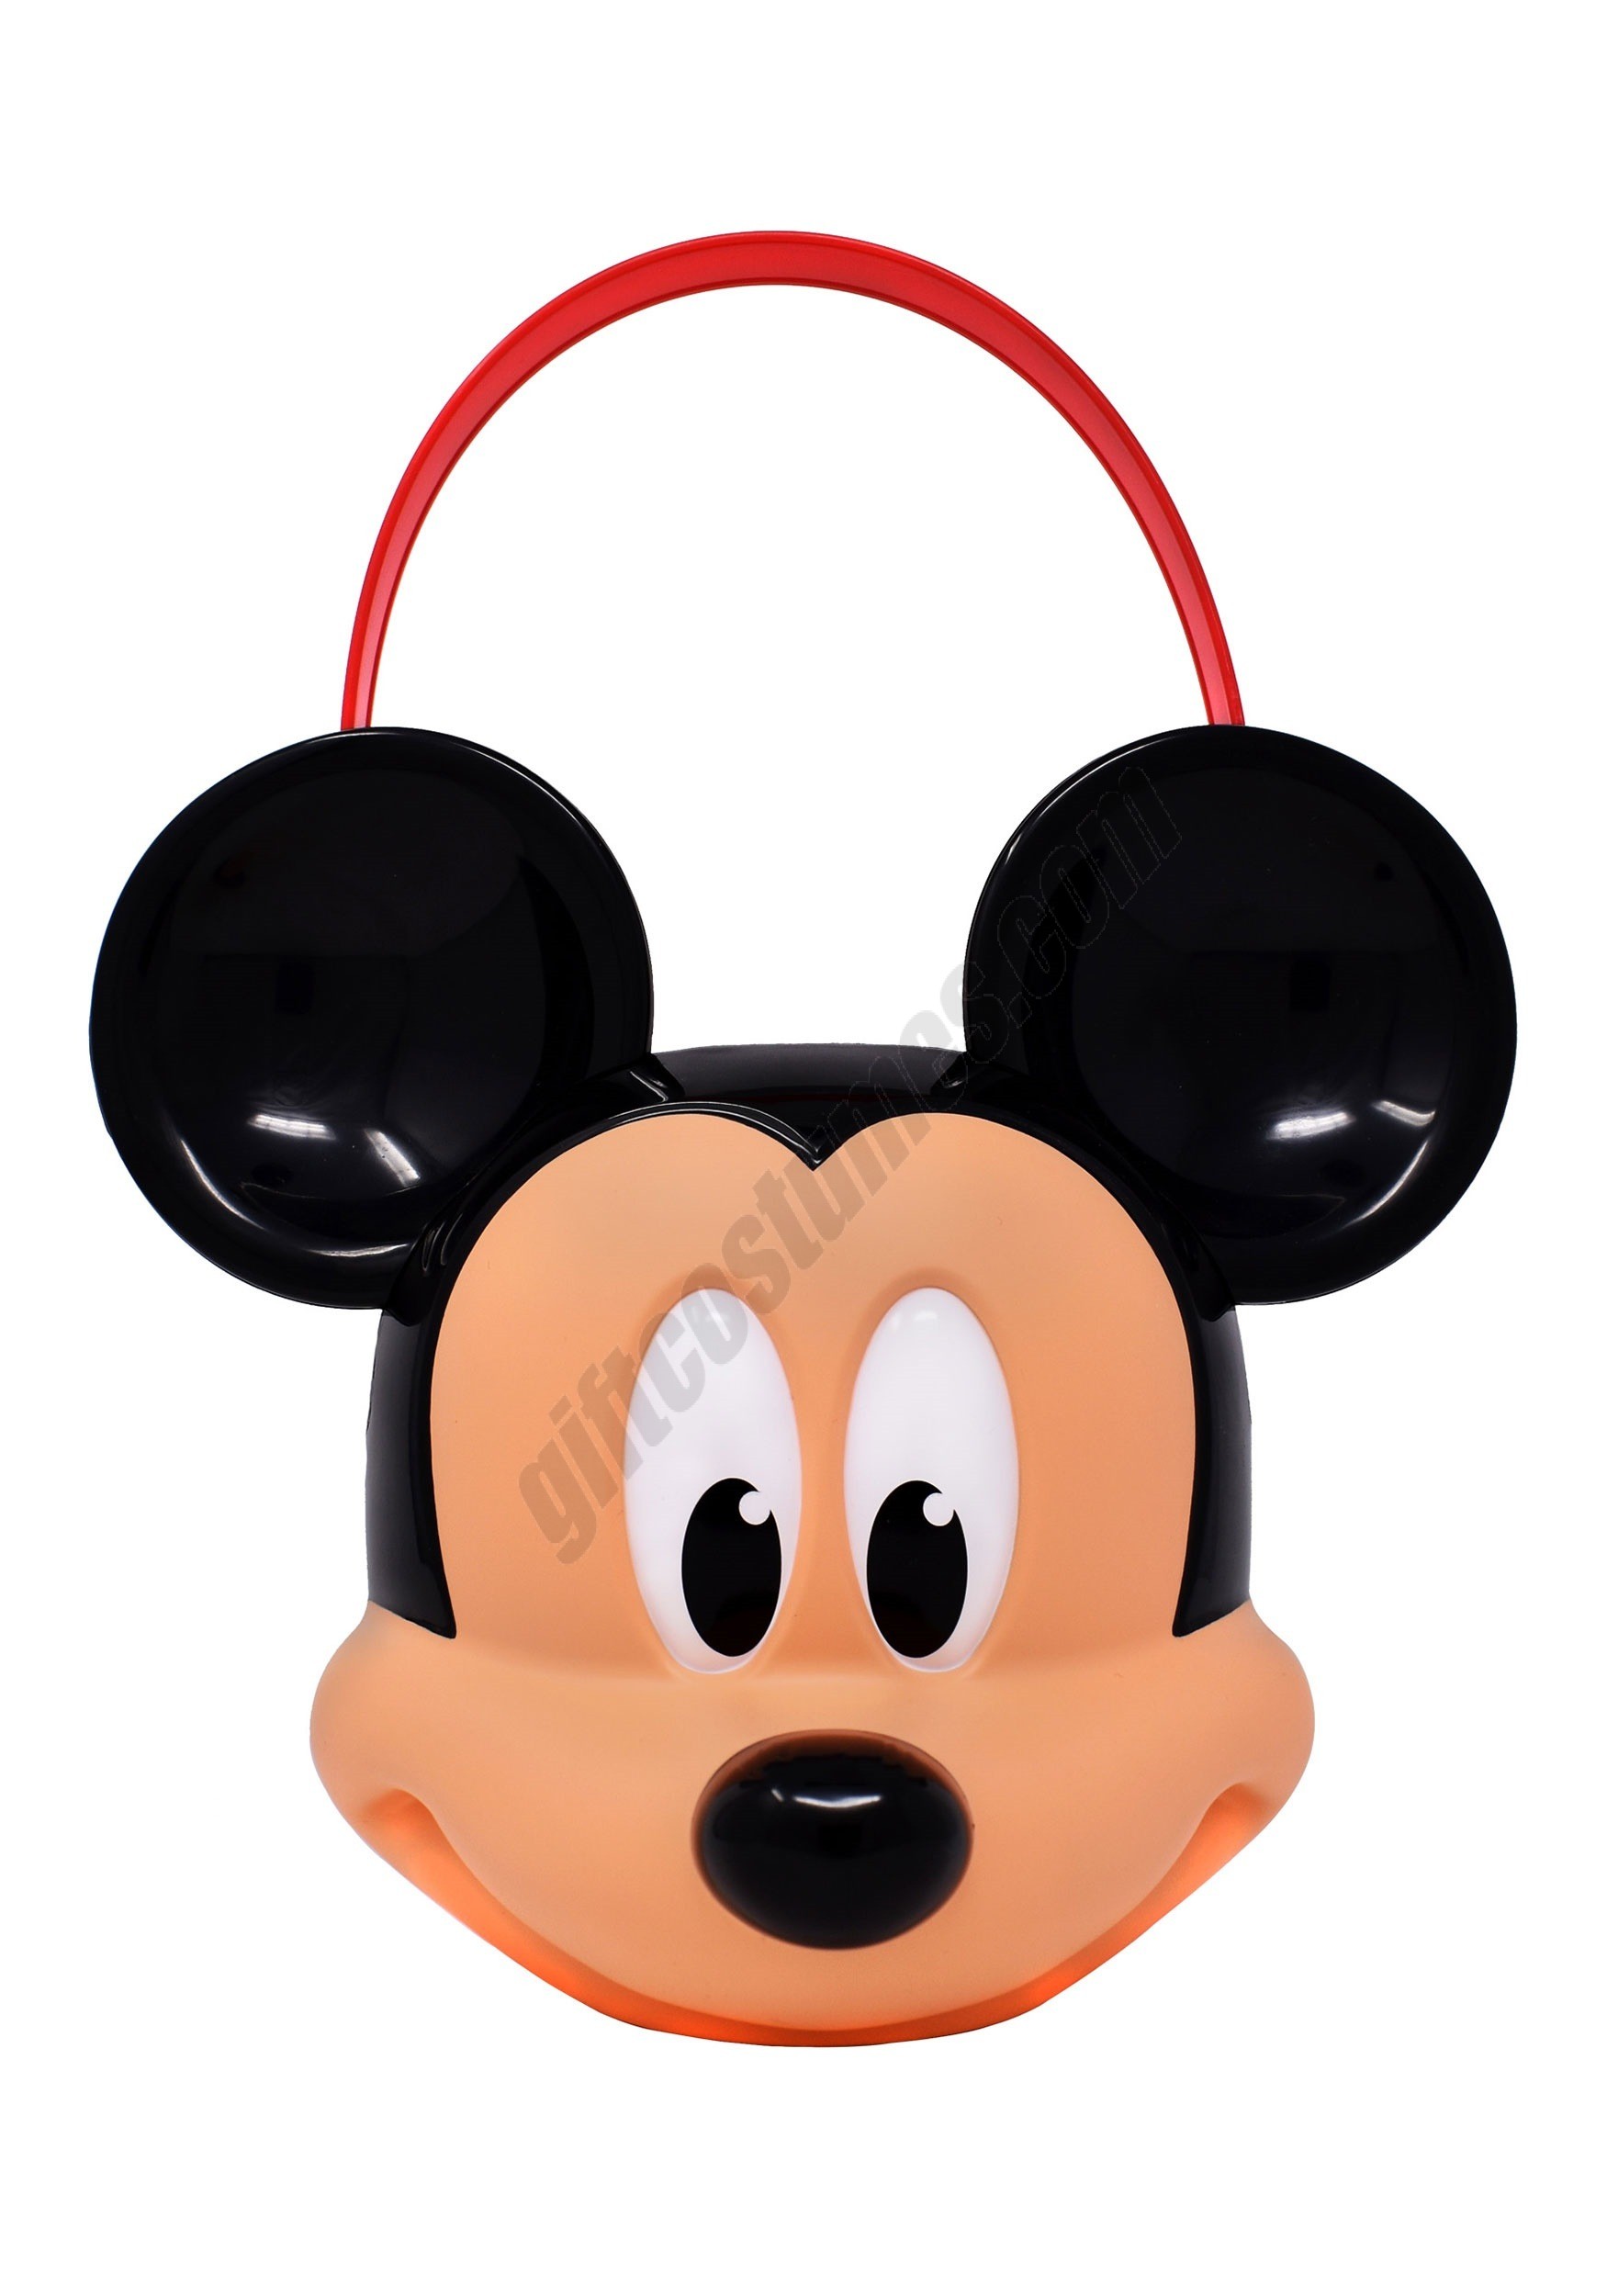 Mickey Mouse Plastic Trick or Treat Bucket Promotions - Mickey Mouse Plastic Trick or Treat Bucket Promotions